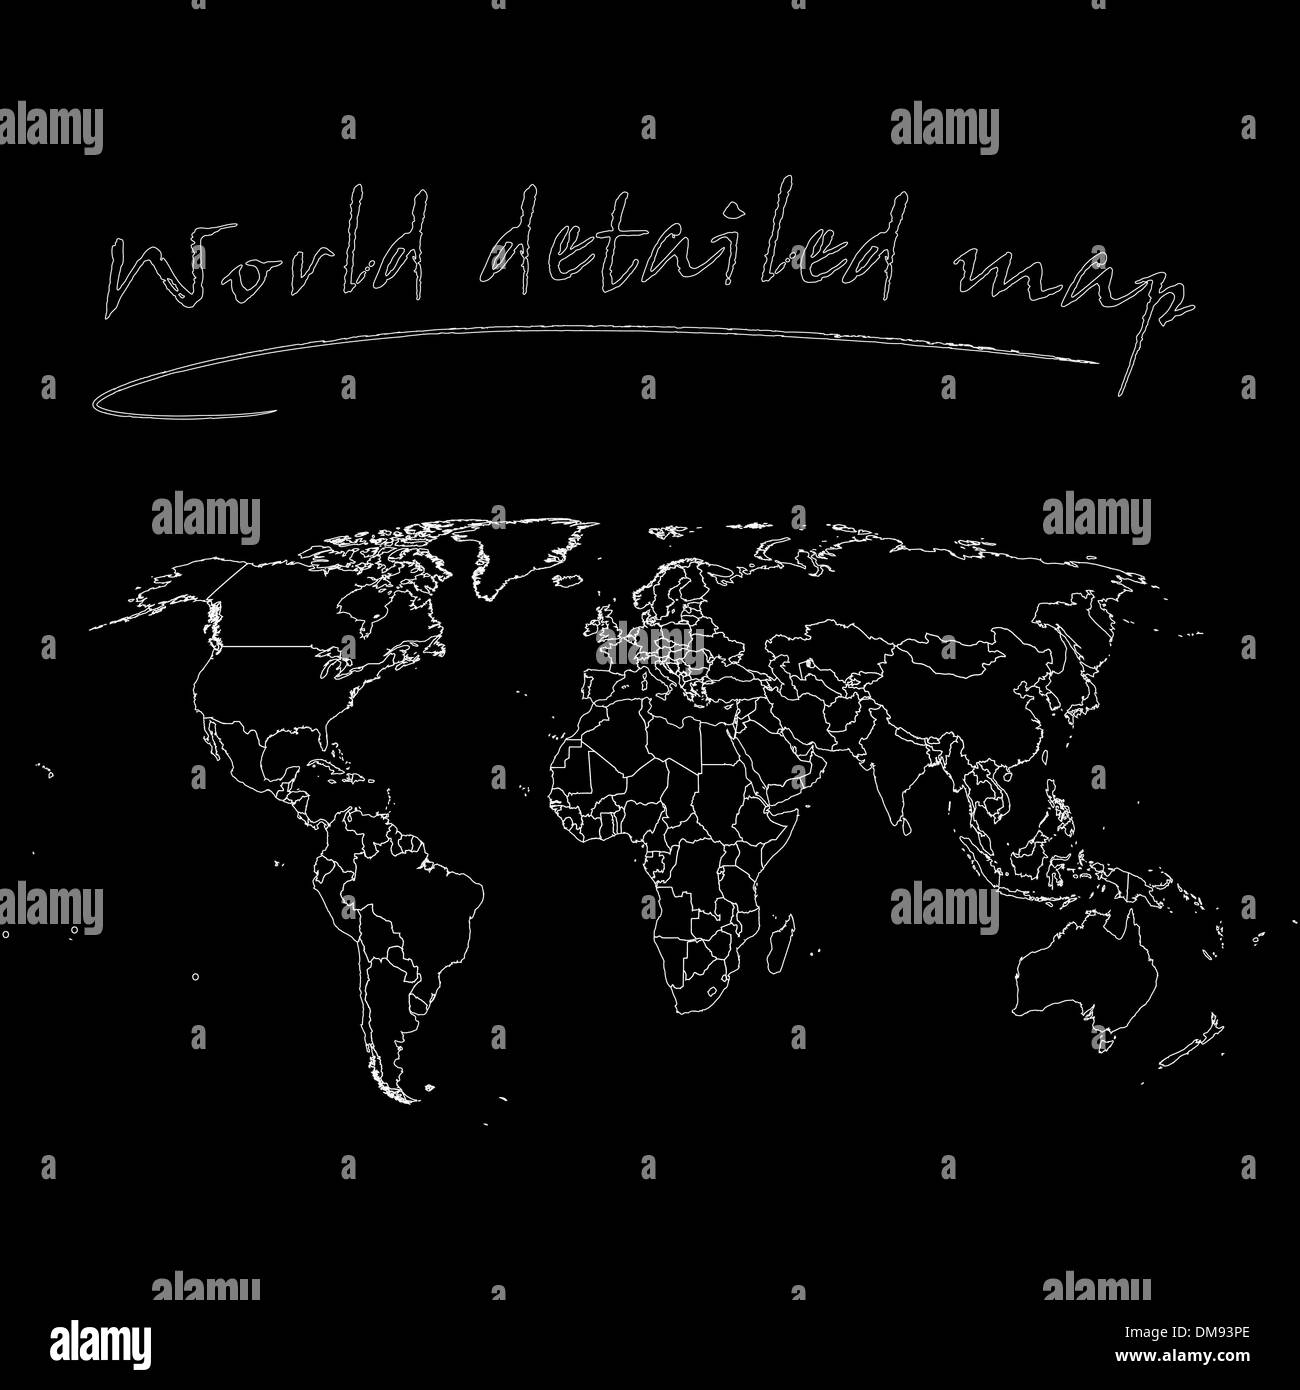 detailed world map over black background Stock Vector